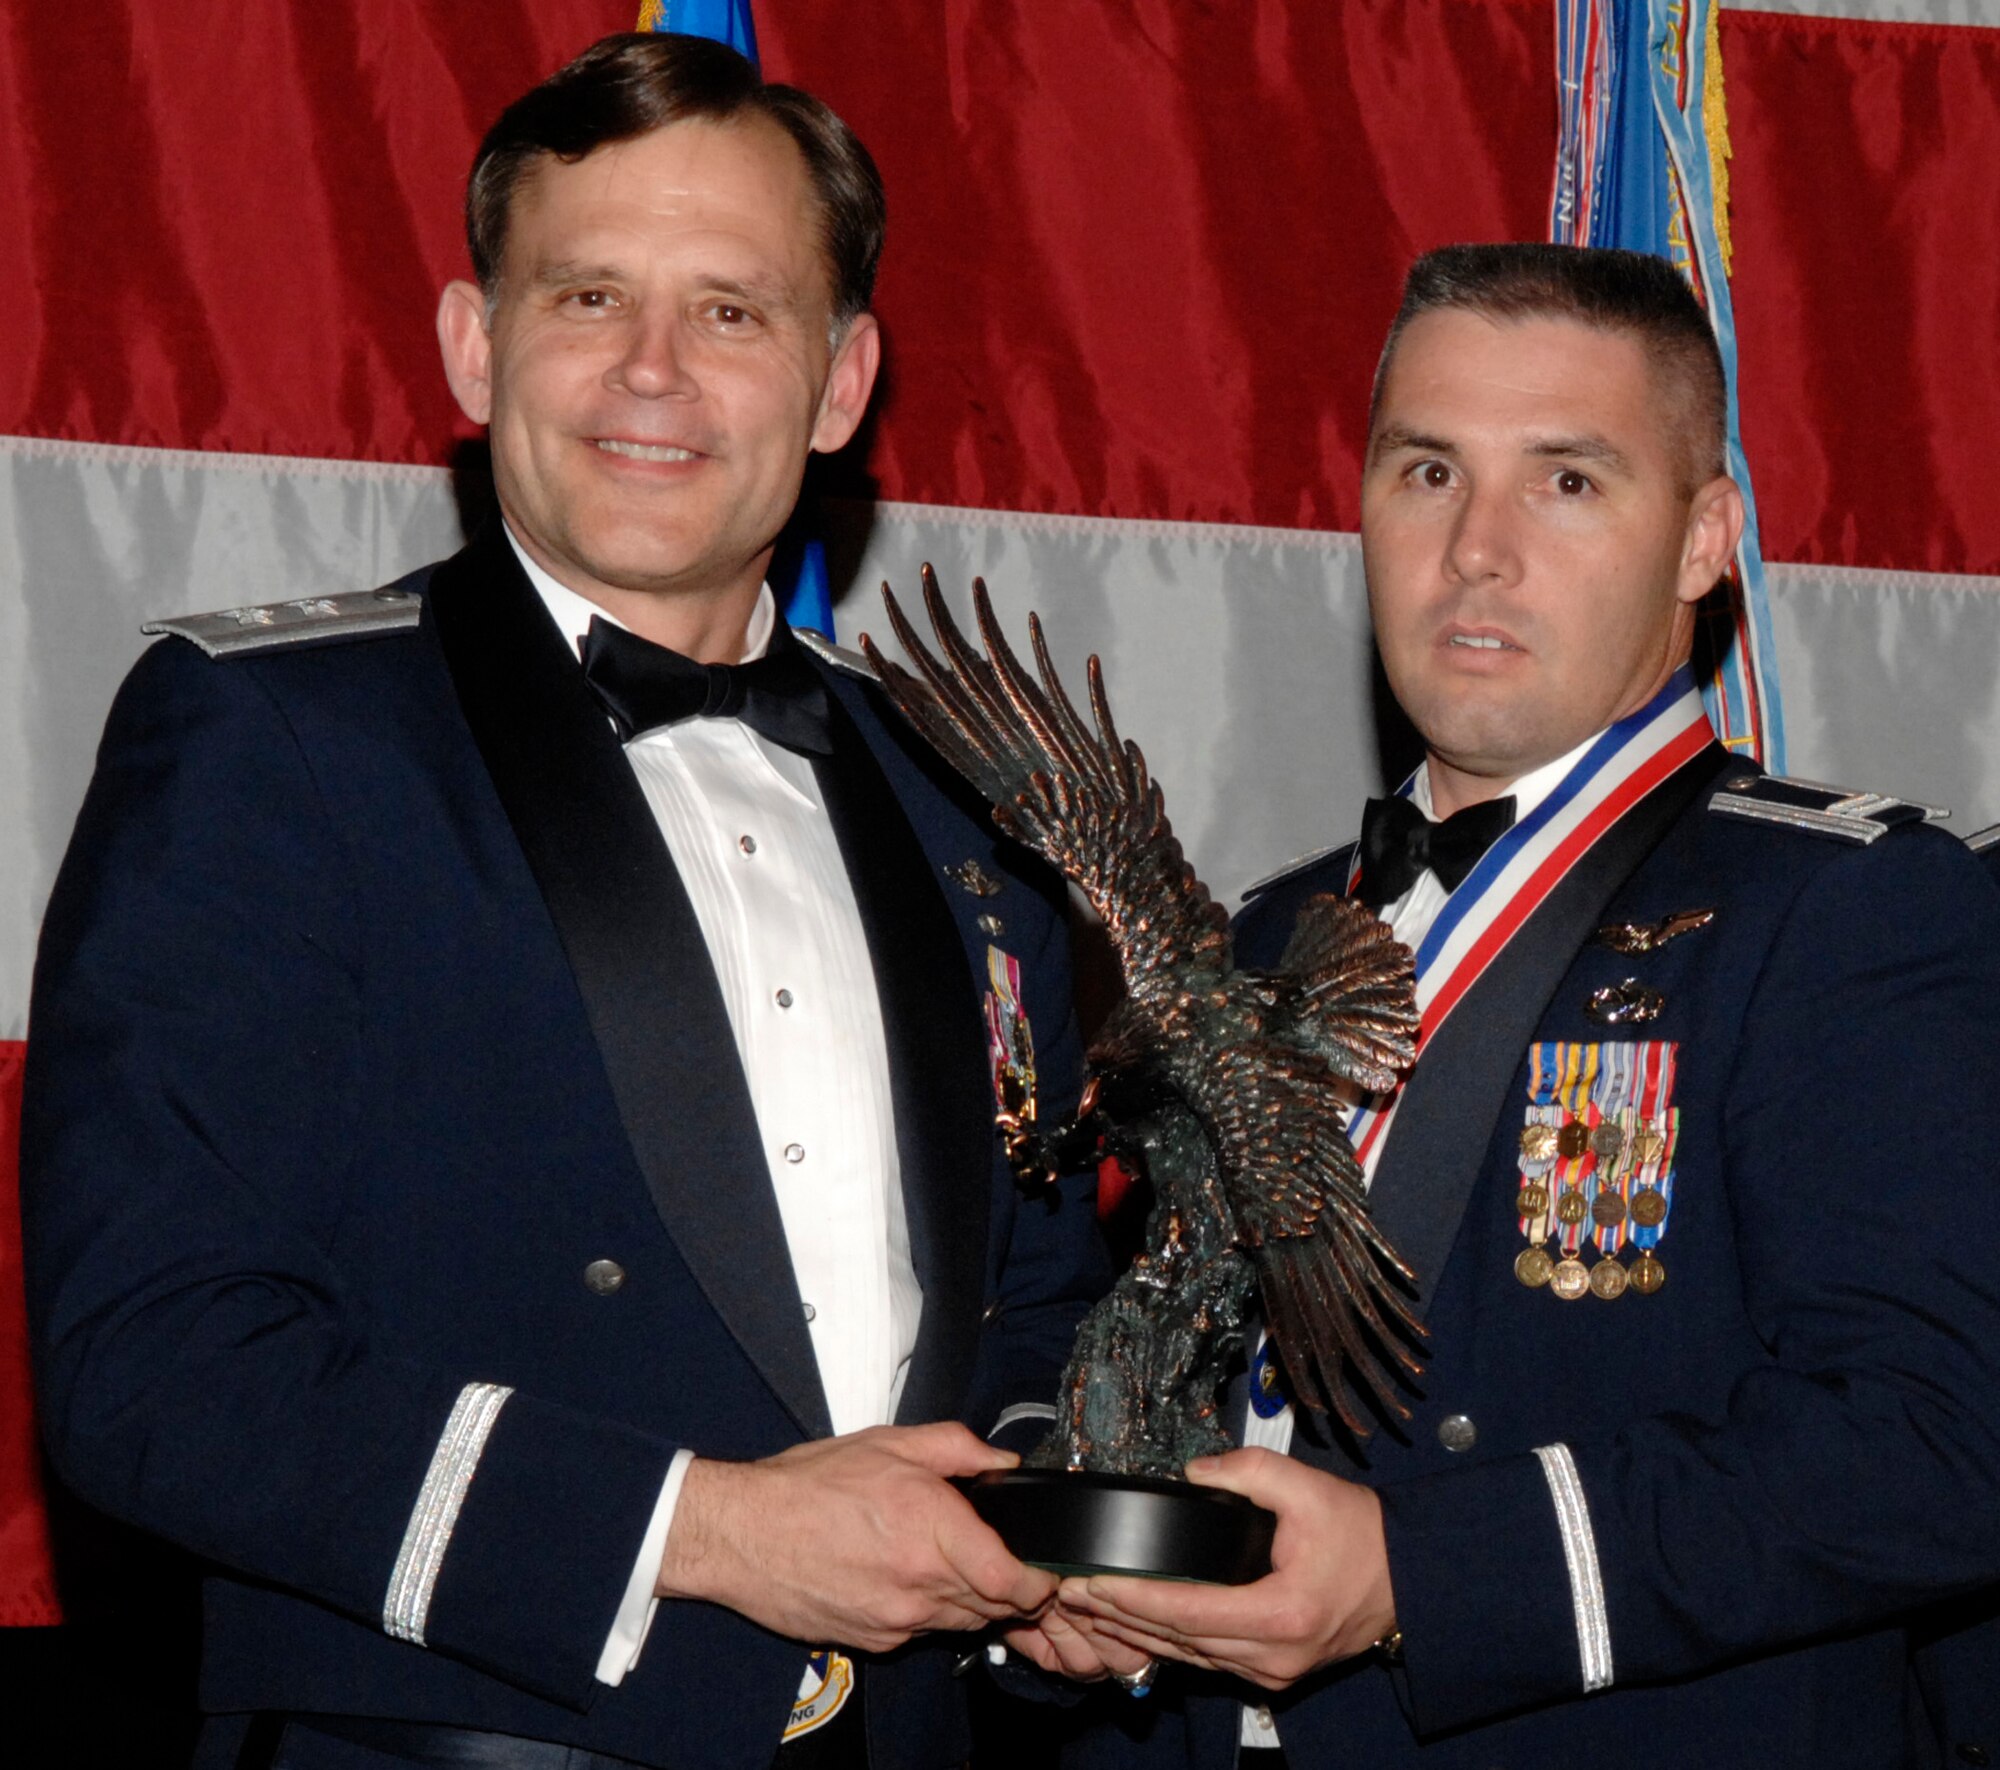 Capt. Ronnie Birge, 81st Range Control Squadron, won the 53d Wing Company Grade Officer of the Year Award during the annual awards banquet Jan. 31 at the Emerald Coast Conference Center.  The night’s guest speaker and former 53d commander, Maj. Gen. (retired) Jack Catton (left) presented the awards. U.S. Air Force photo.